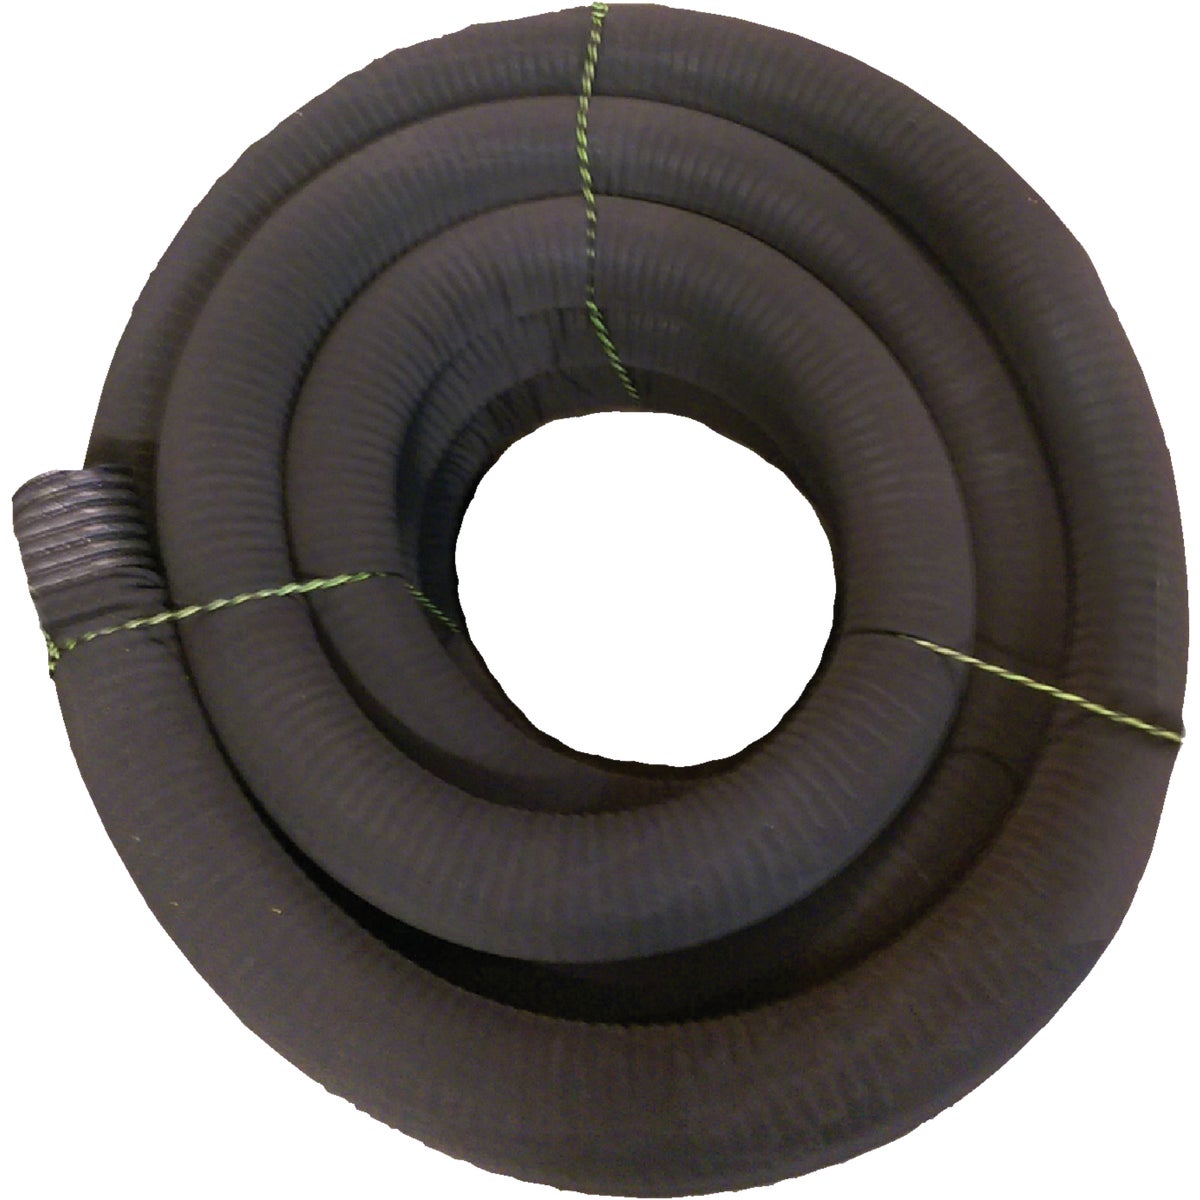 Advanced Drainage Systems 3 In. X 100 Ft. Perforated Corrugated Drain Pipe with Filter Sock